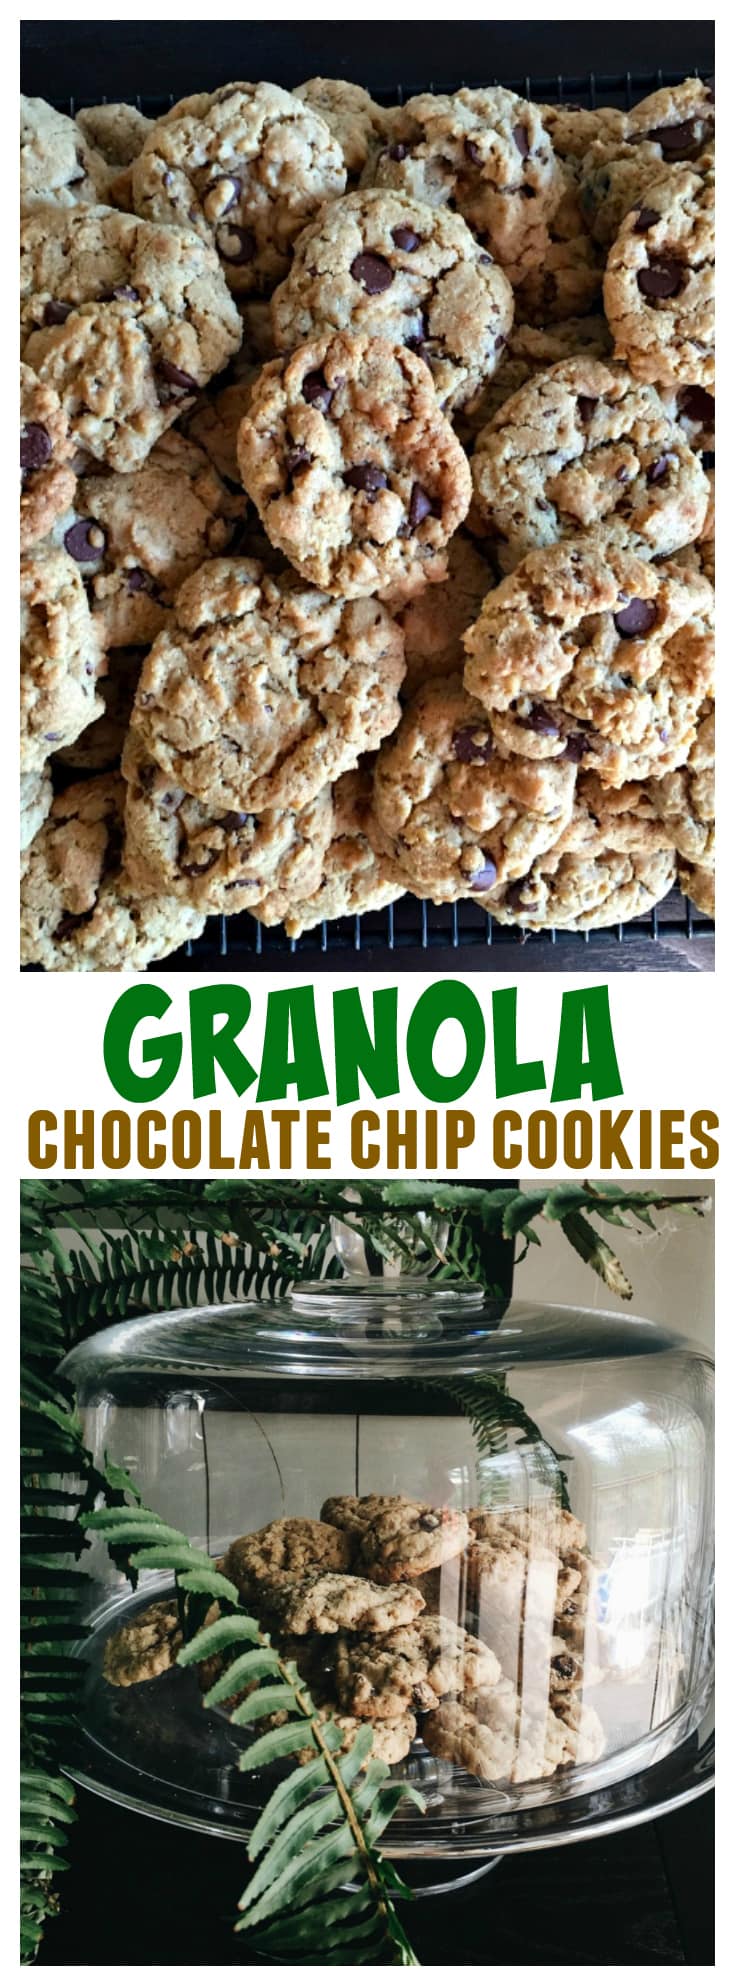 Granola Chocolate Chip Cookies at ReluctantEntertainer.com